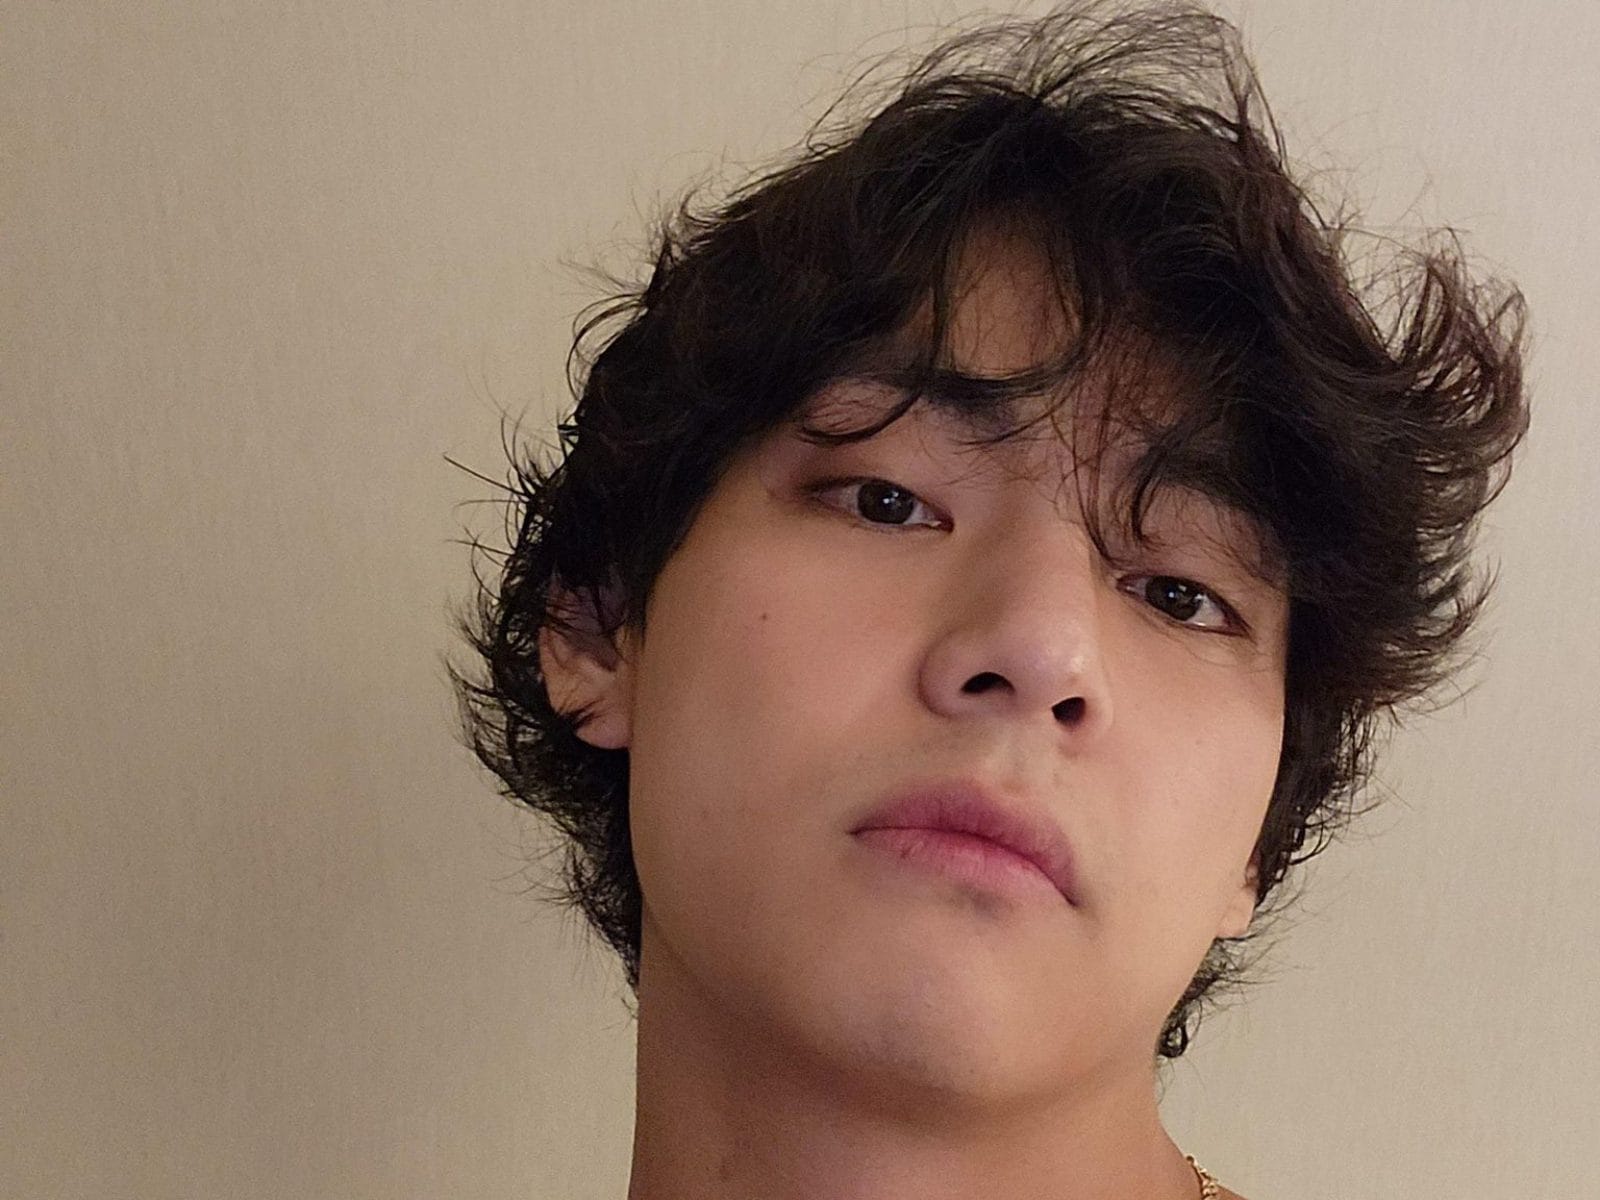 tilskuer gøre ondt voldgrav BTS: Kim Taehyung Goes Shirtless To Wish Fans On ARMY Day, Fandom Wasn't  Prepared For Thirst Trap